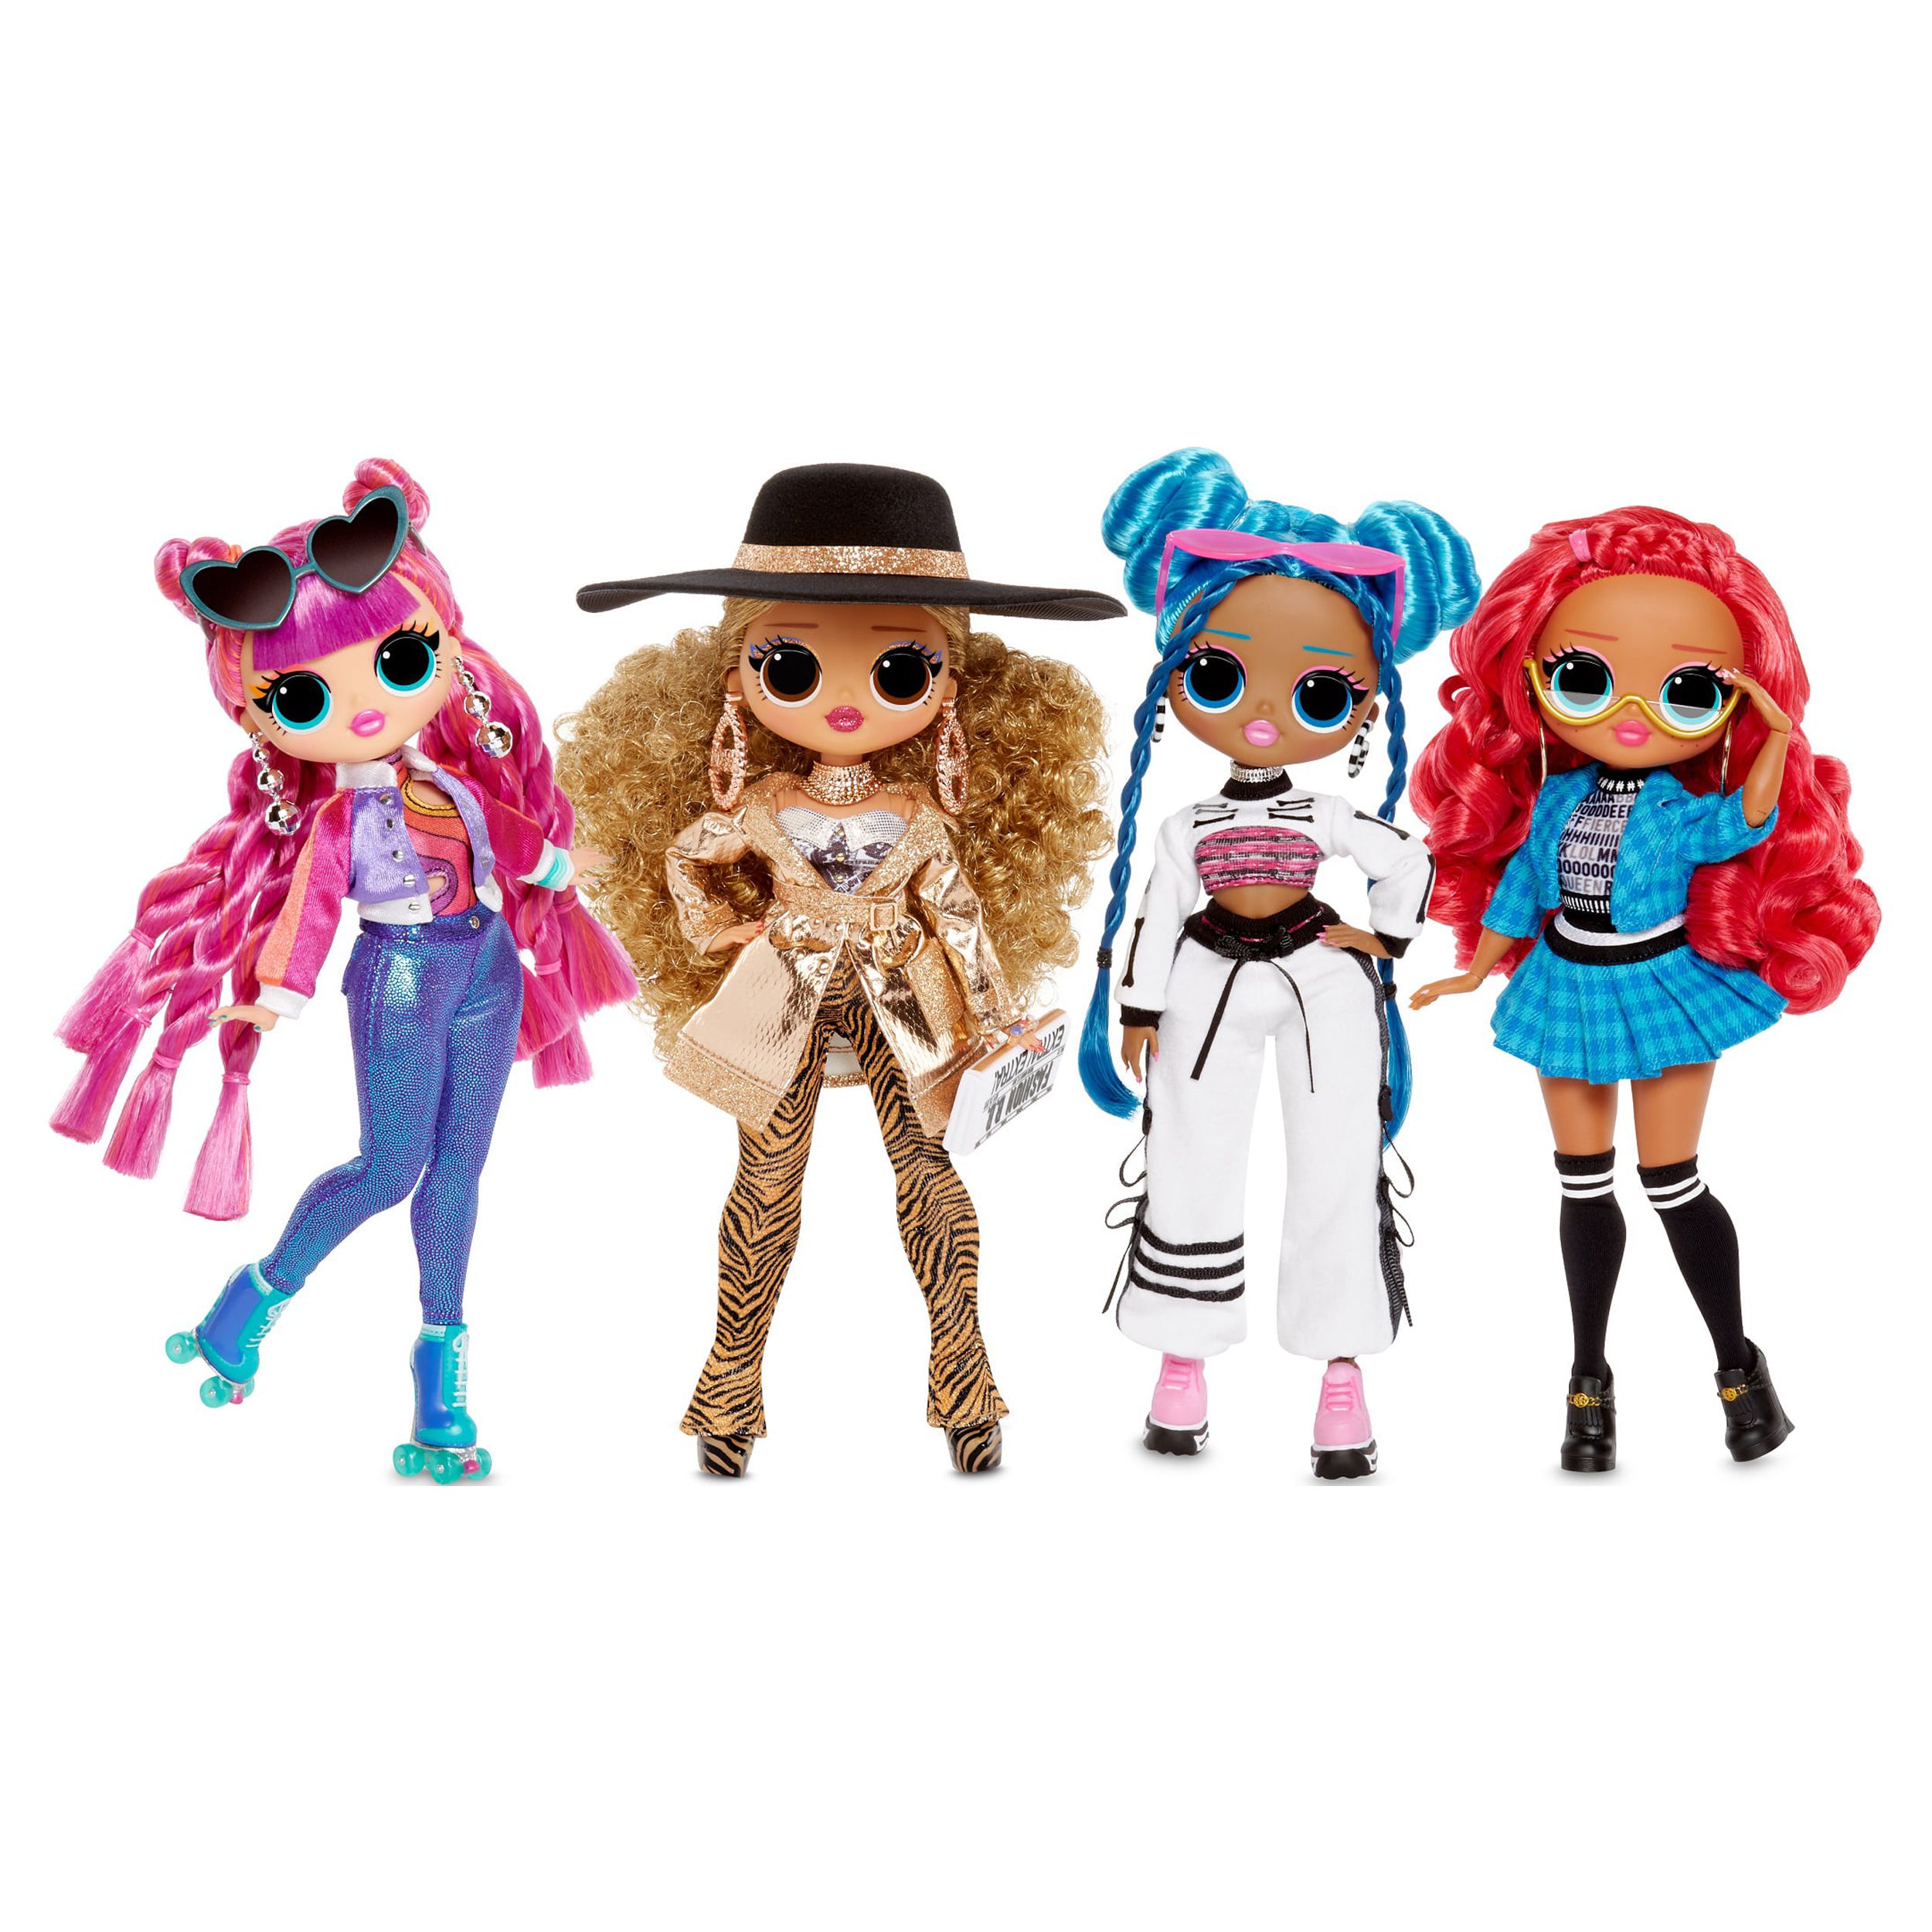 LOL Surprise OMG Series 3 Chillax Fashion Doll With 20 Surprises, Great Gift for Kids Ages 4 5 6+ - image 7 of 7